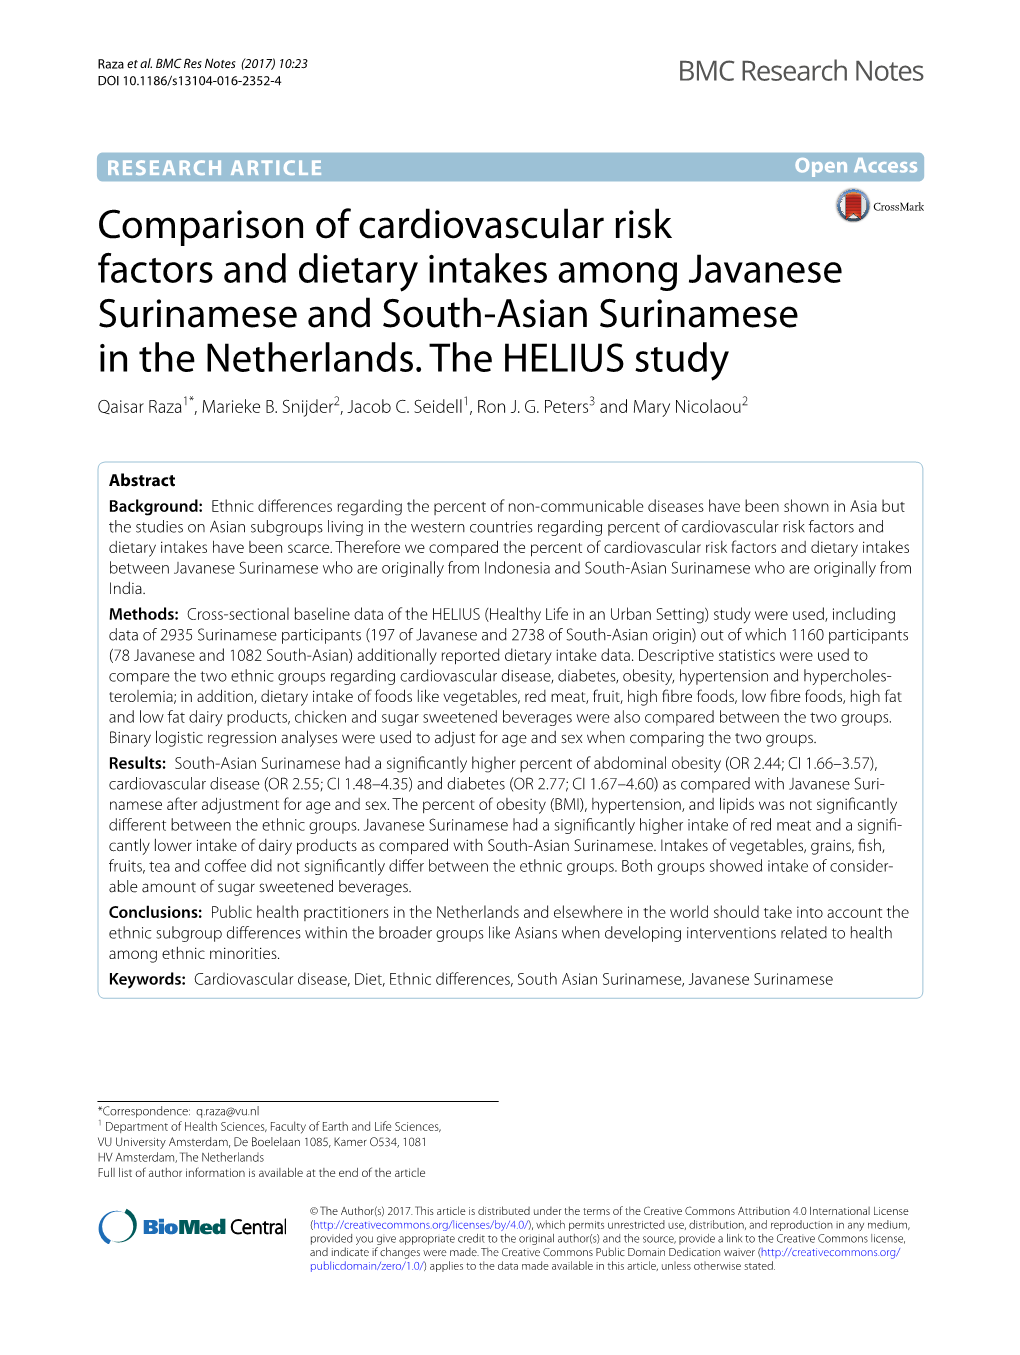 Comparison of Cardiovascular Risk Factors and Dietary Intakes Among Javanese Surinamese and South‑Asian Surinamese in the Netherlands